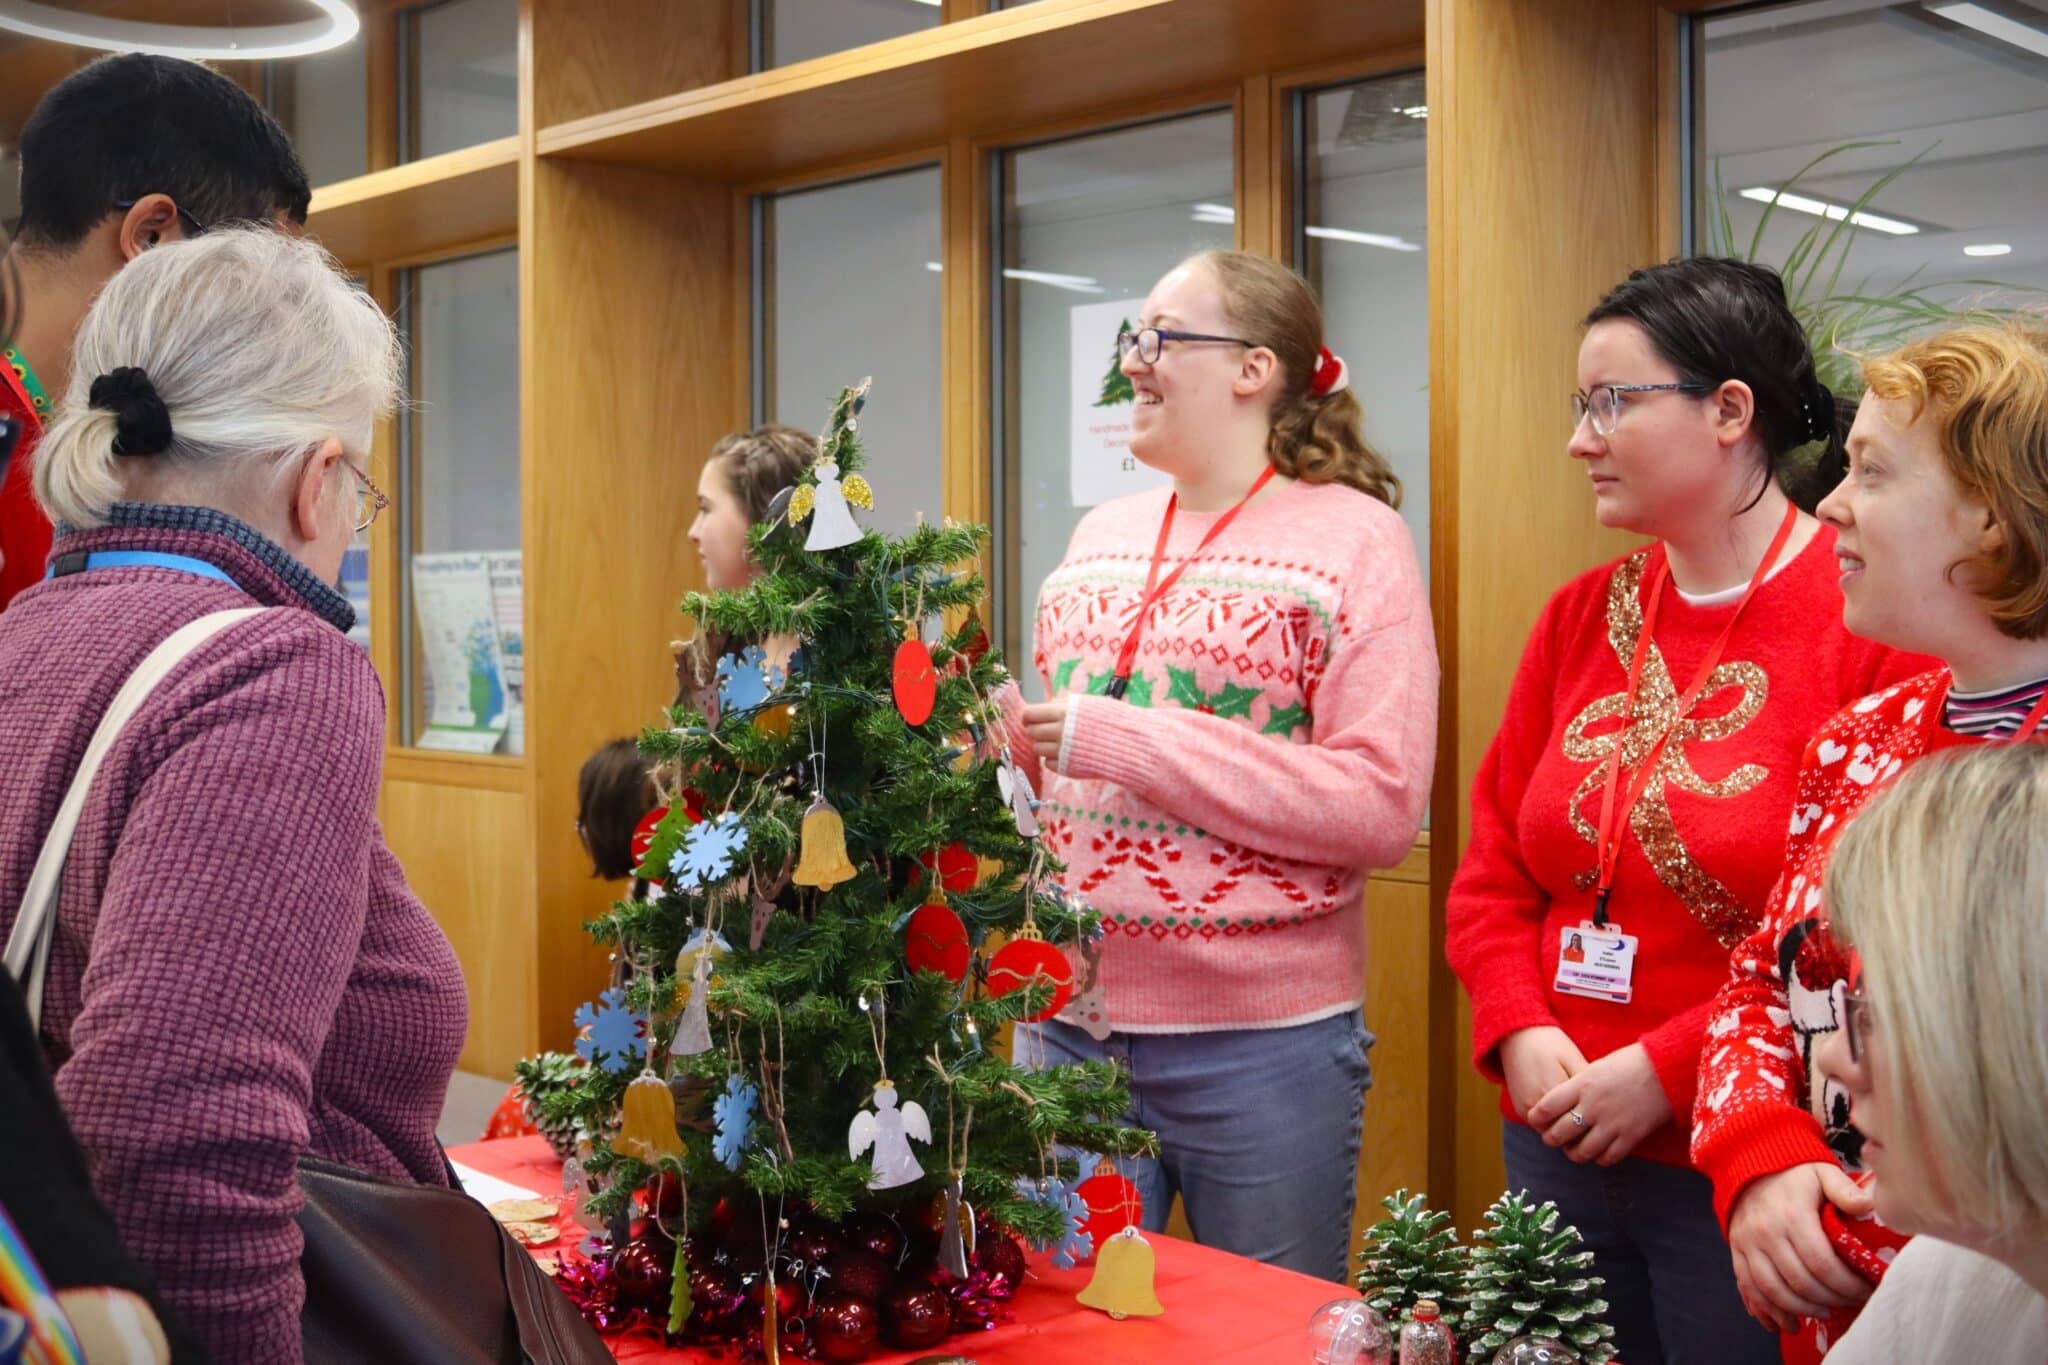 Foundation Learning students get into the Christmas business - students selling